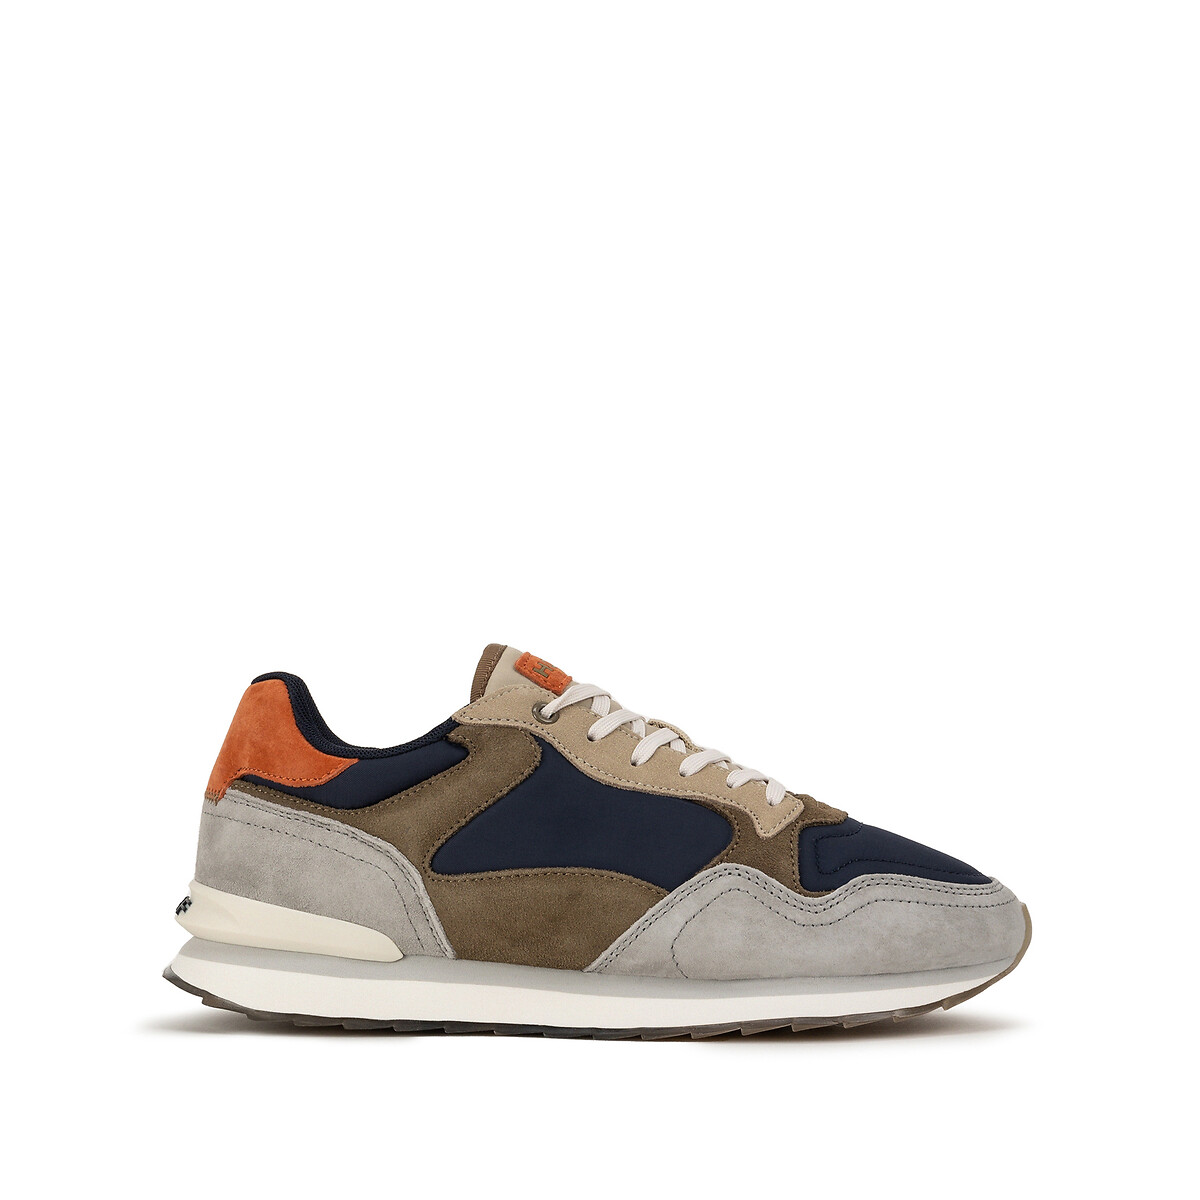 City Biarritz Suede Trainers